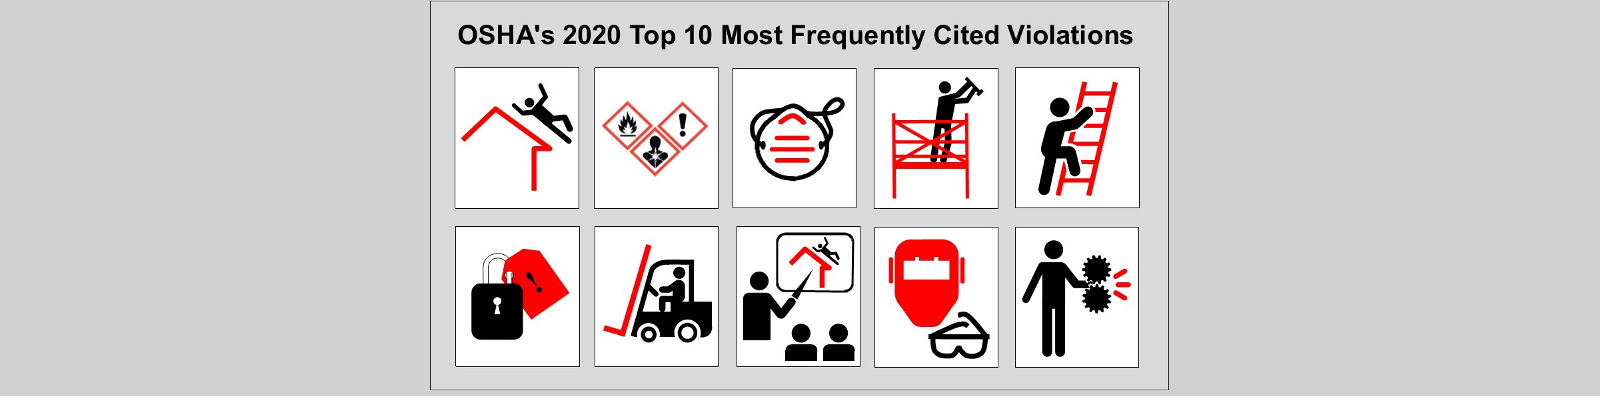 OSHA's 2020 Top 10 Most Frequently Cited Violations - Includes illustrations symbolizing the top ten most frequently cited standards in the list on this page